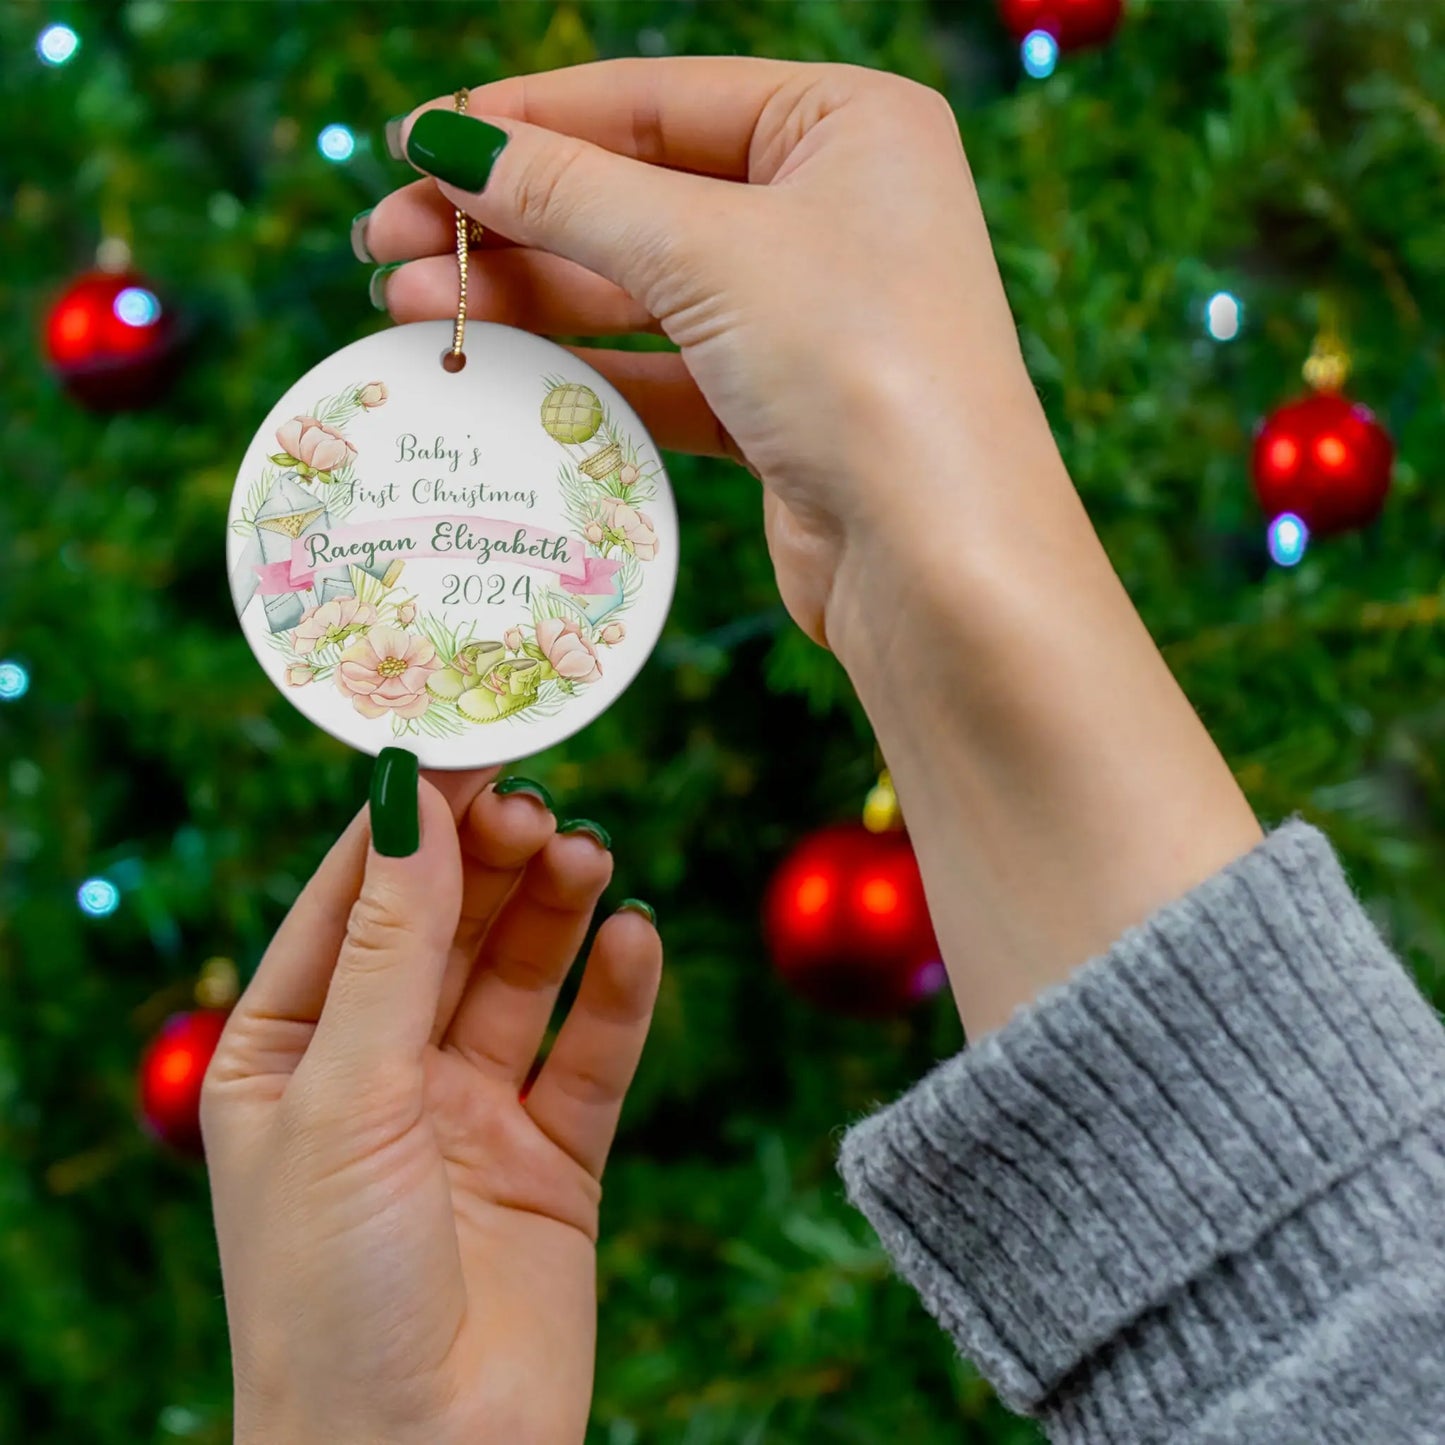 Baby's First Christmas Personalized Ceramic Ornament Printify